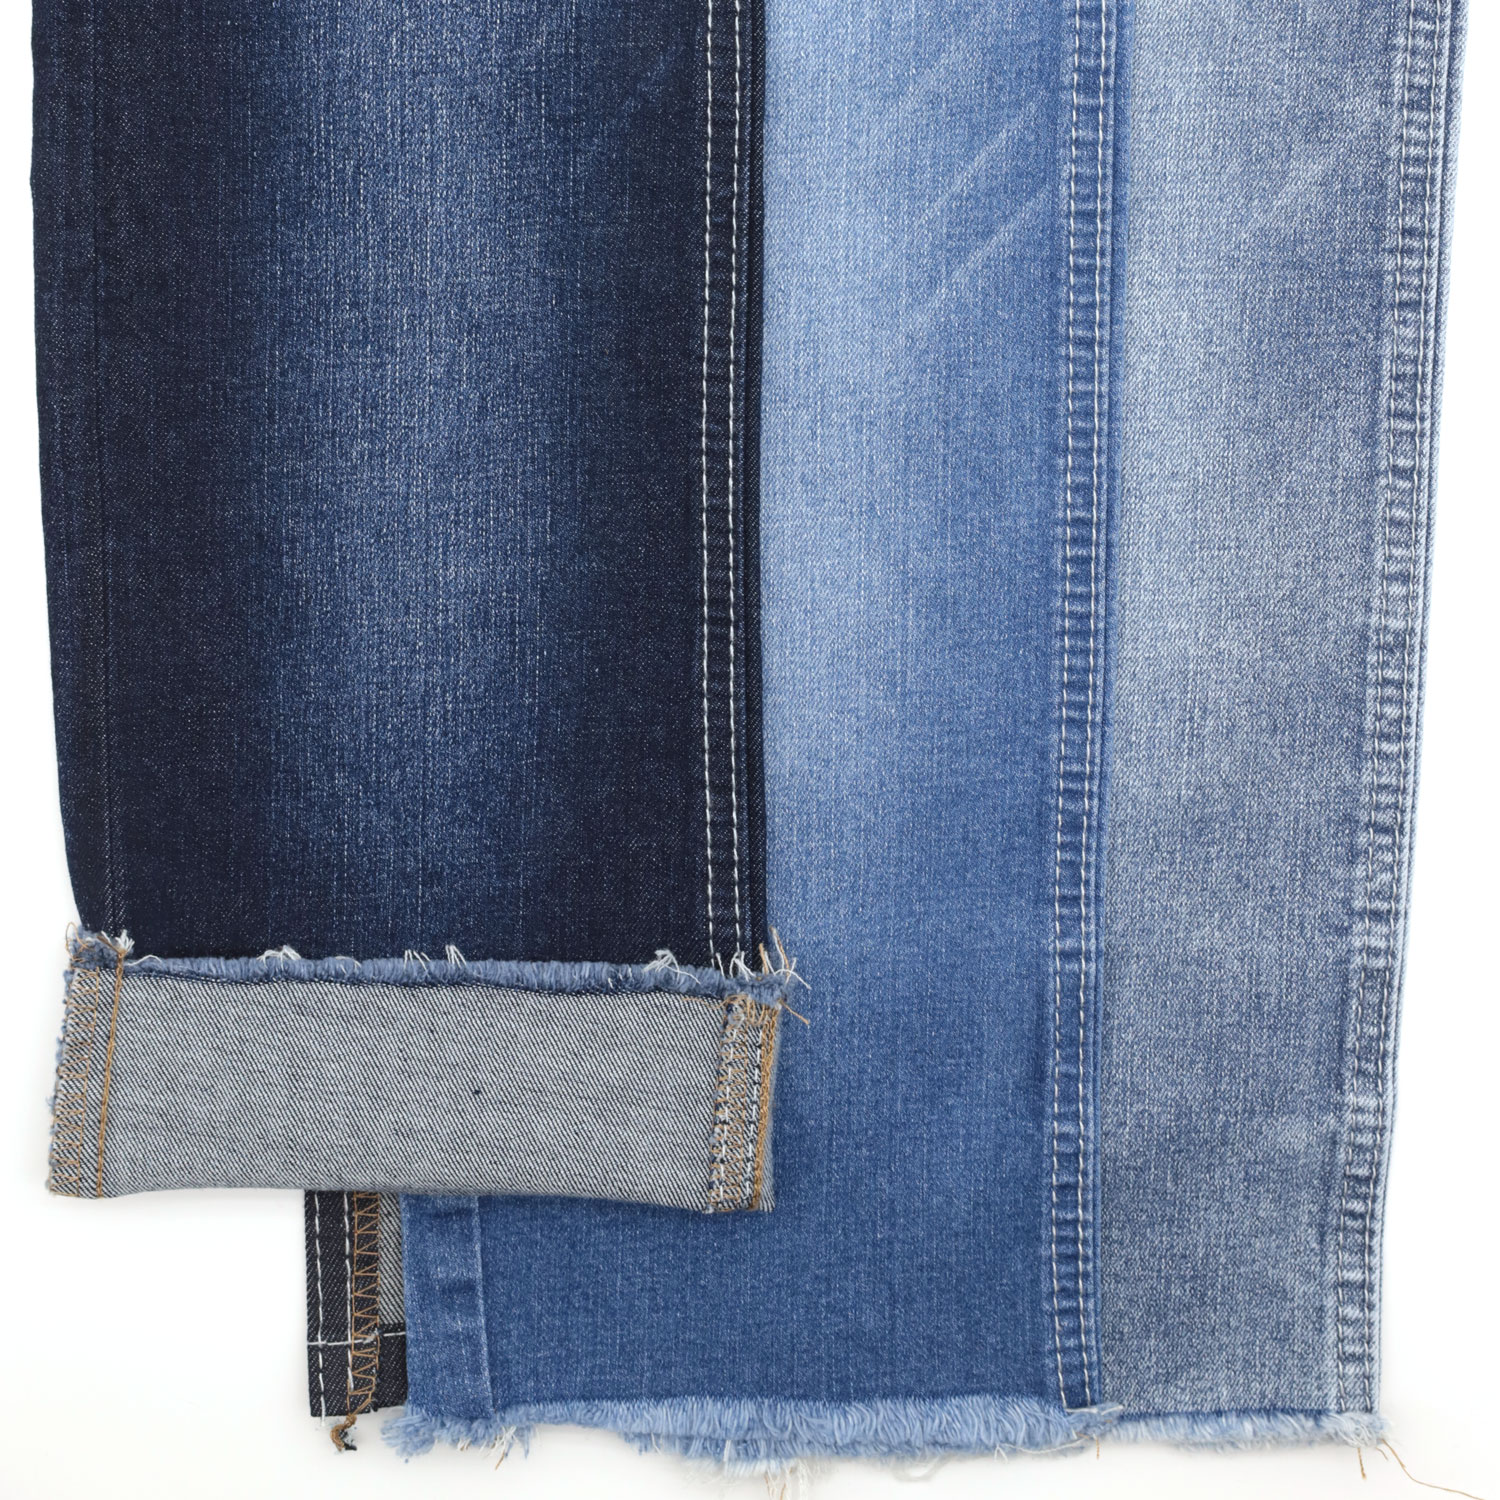 How You Can Make Money on China Denim Fabric Products 1